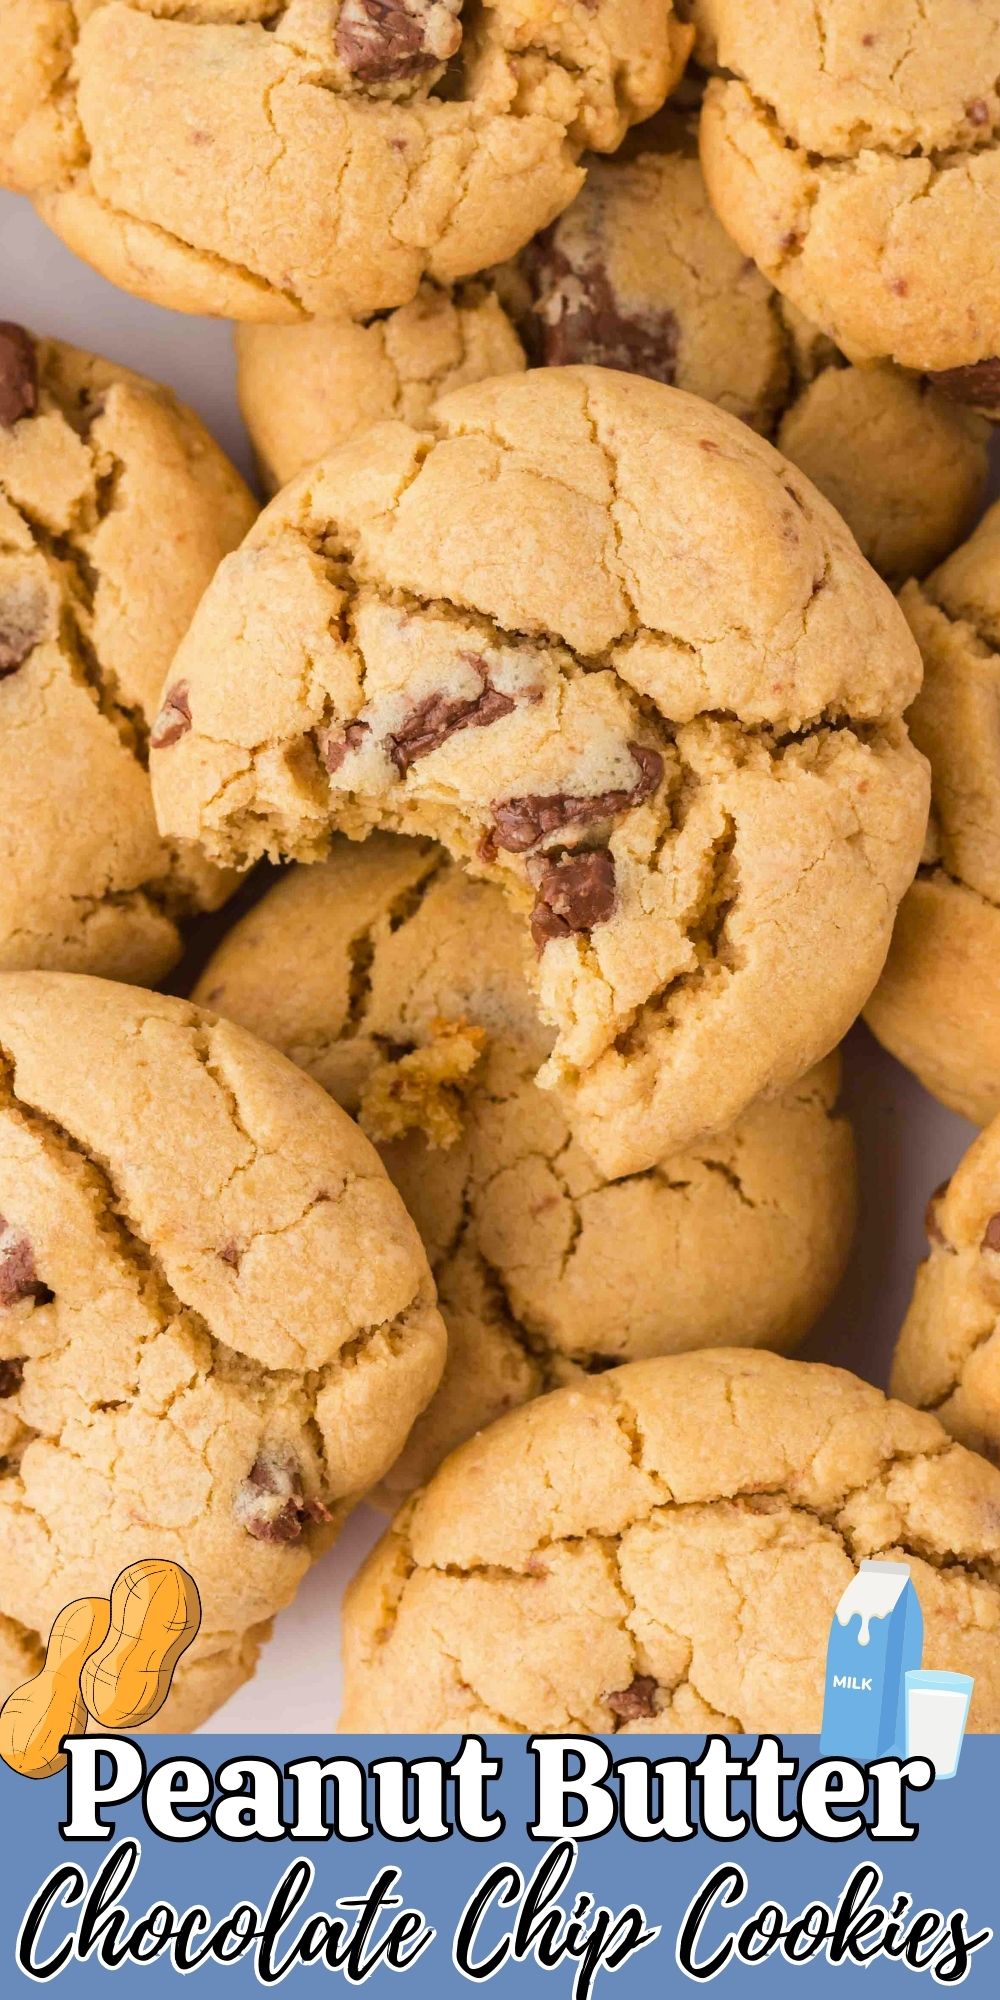 These soft and chewy Peanut Butter Chocolate Chip Cookies combine the best flavors in a soft, warm cookie.